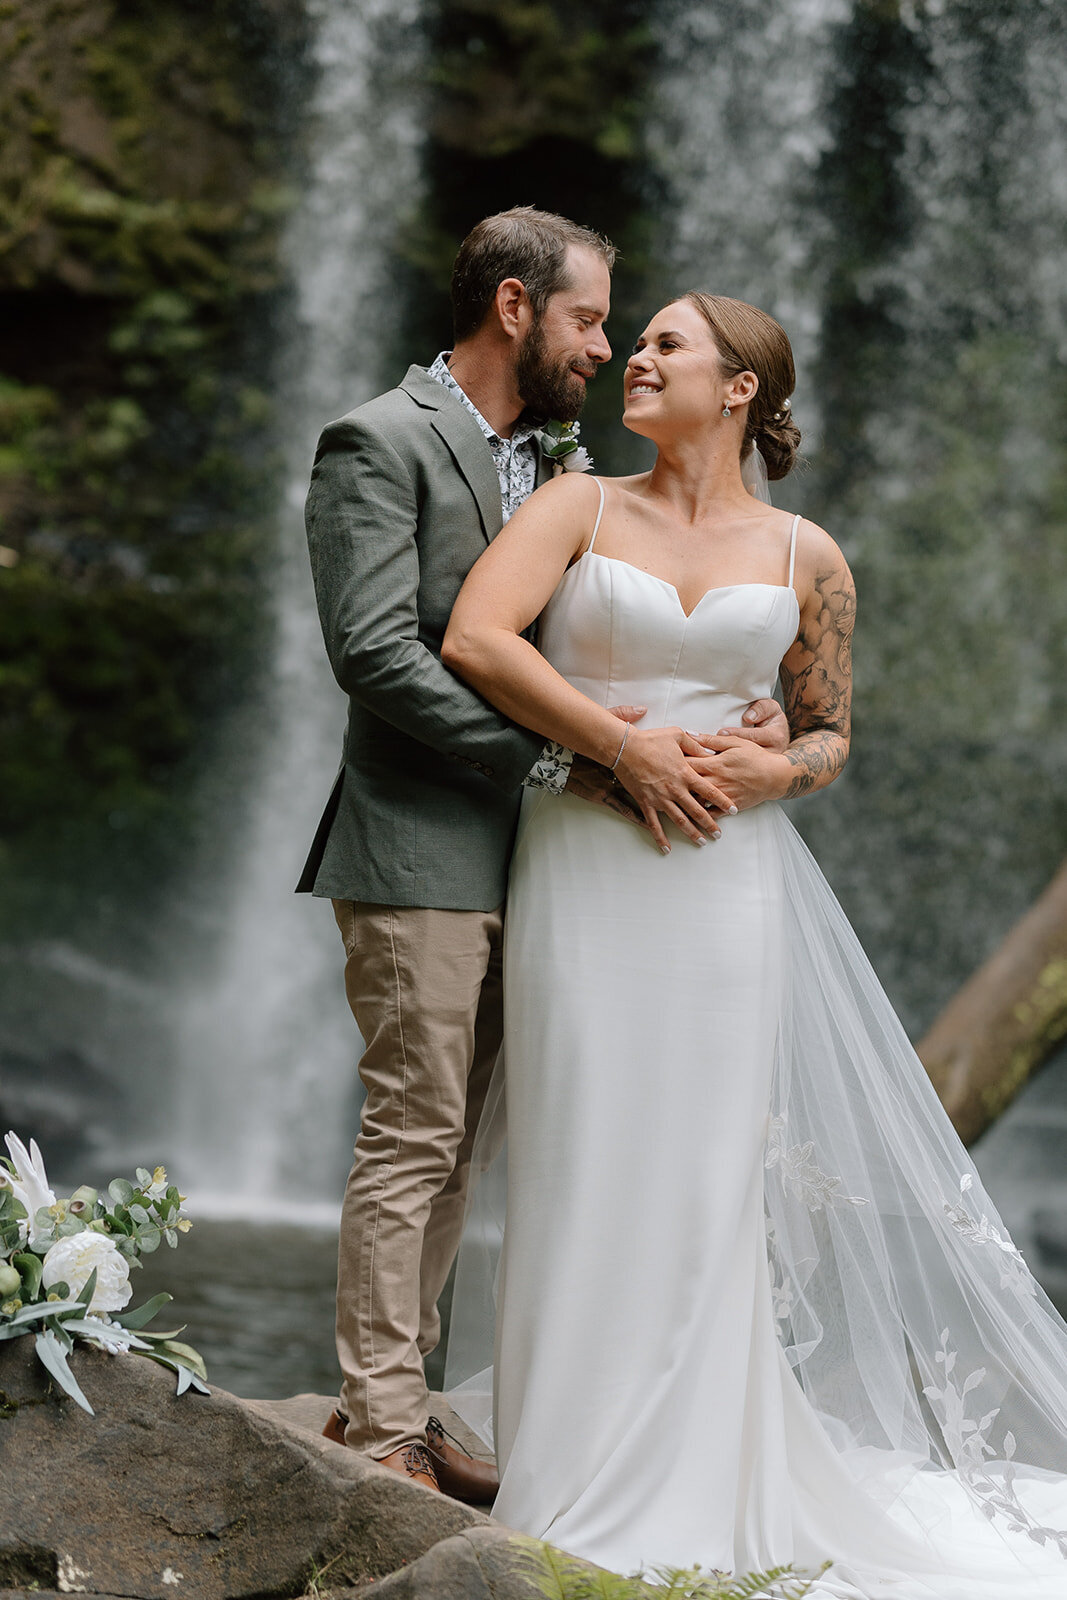 Stacey&Cory-Coast&Pines-232